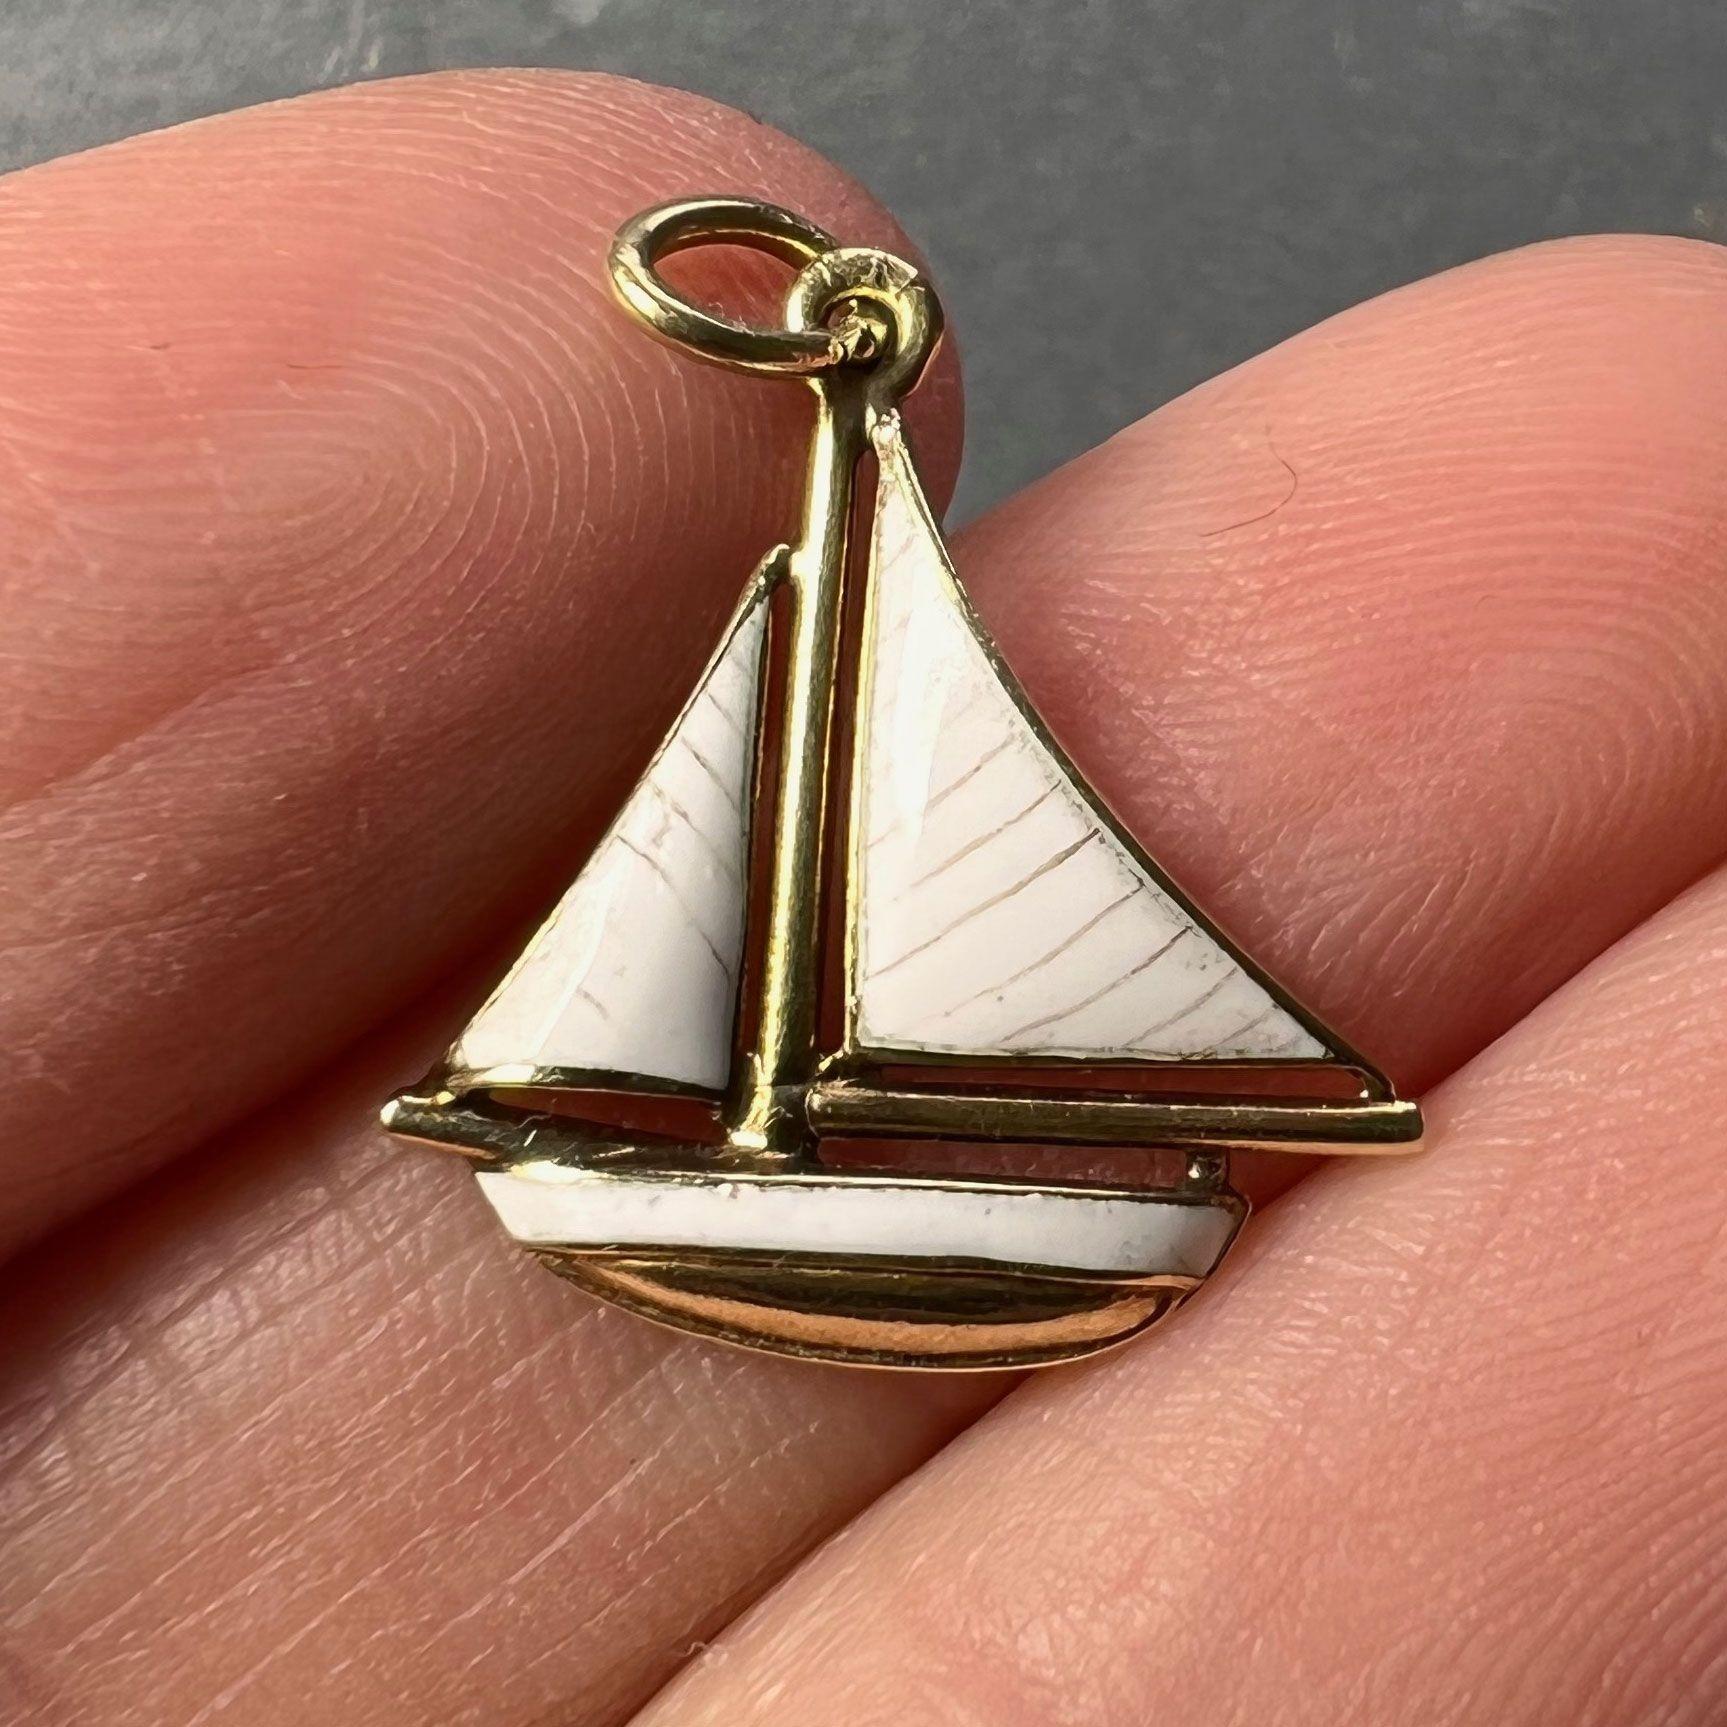 A 14 karat (14K) yellow gold charm pendant designed as a sailboat or yacht with white enamel sails and subtle brown stripe detail. Stamped 14K for 14 karat gold to the jump ring.

Dimensions: 1.6 x 1.5 x 0.2 cm (not including jump ring)
Weight: 0.88